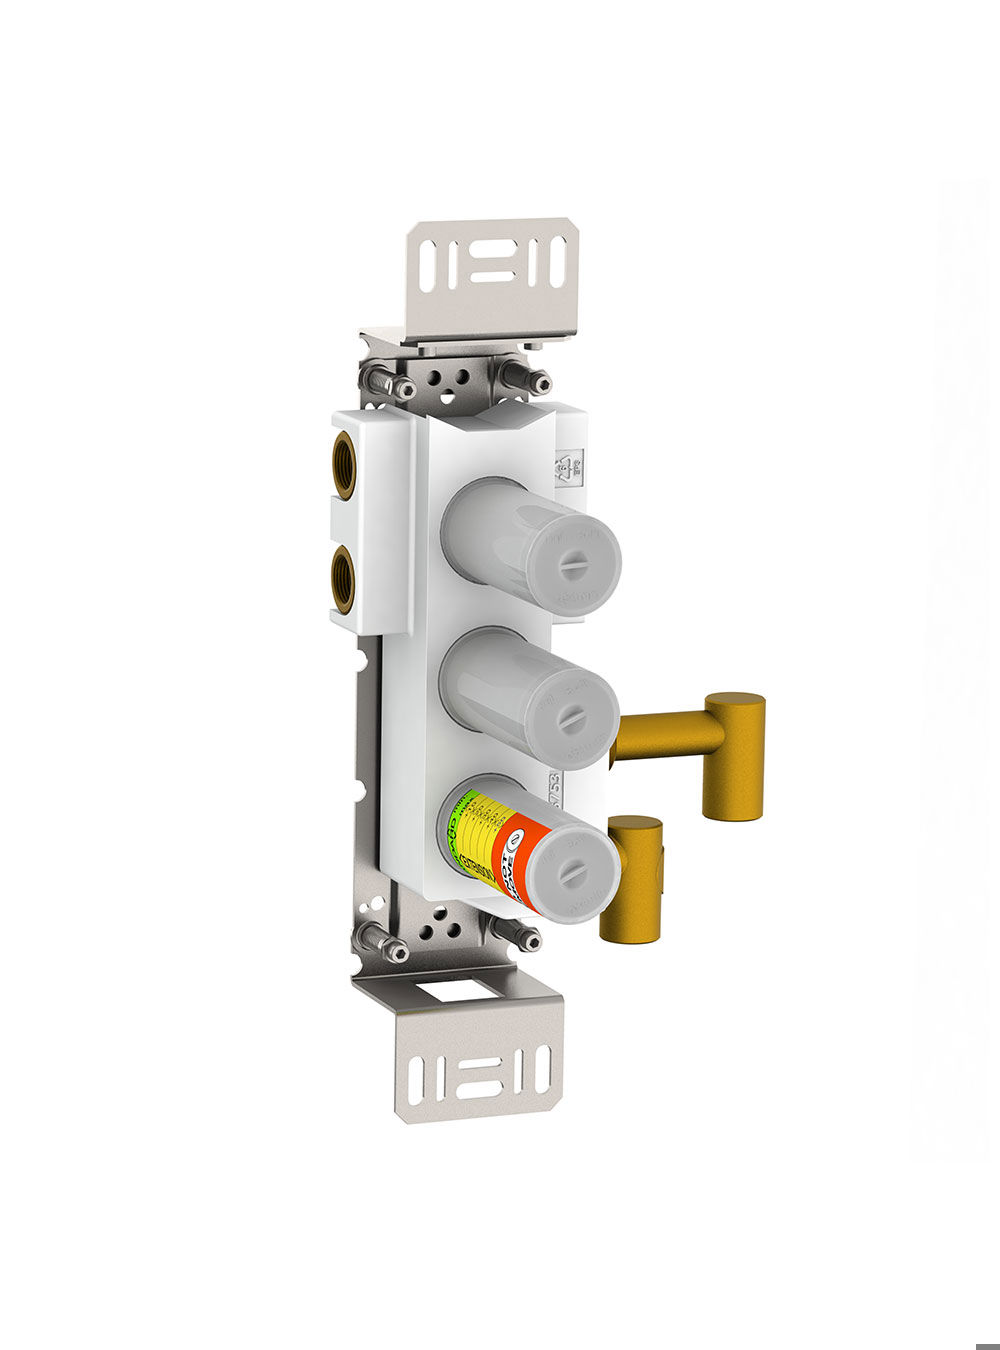 5600VA4: Thermostatic mixer with 4-way diverter for vertical mounting.
¾" connection to copper, steel, iron o